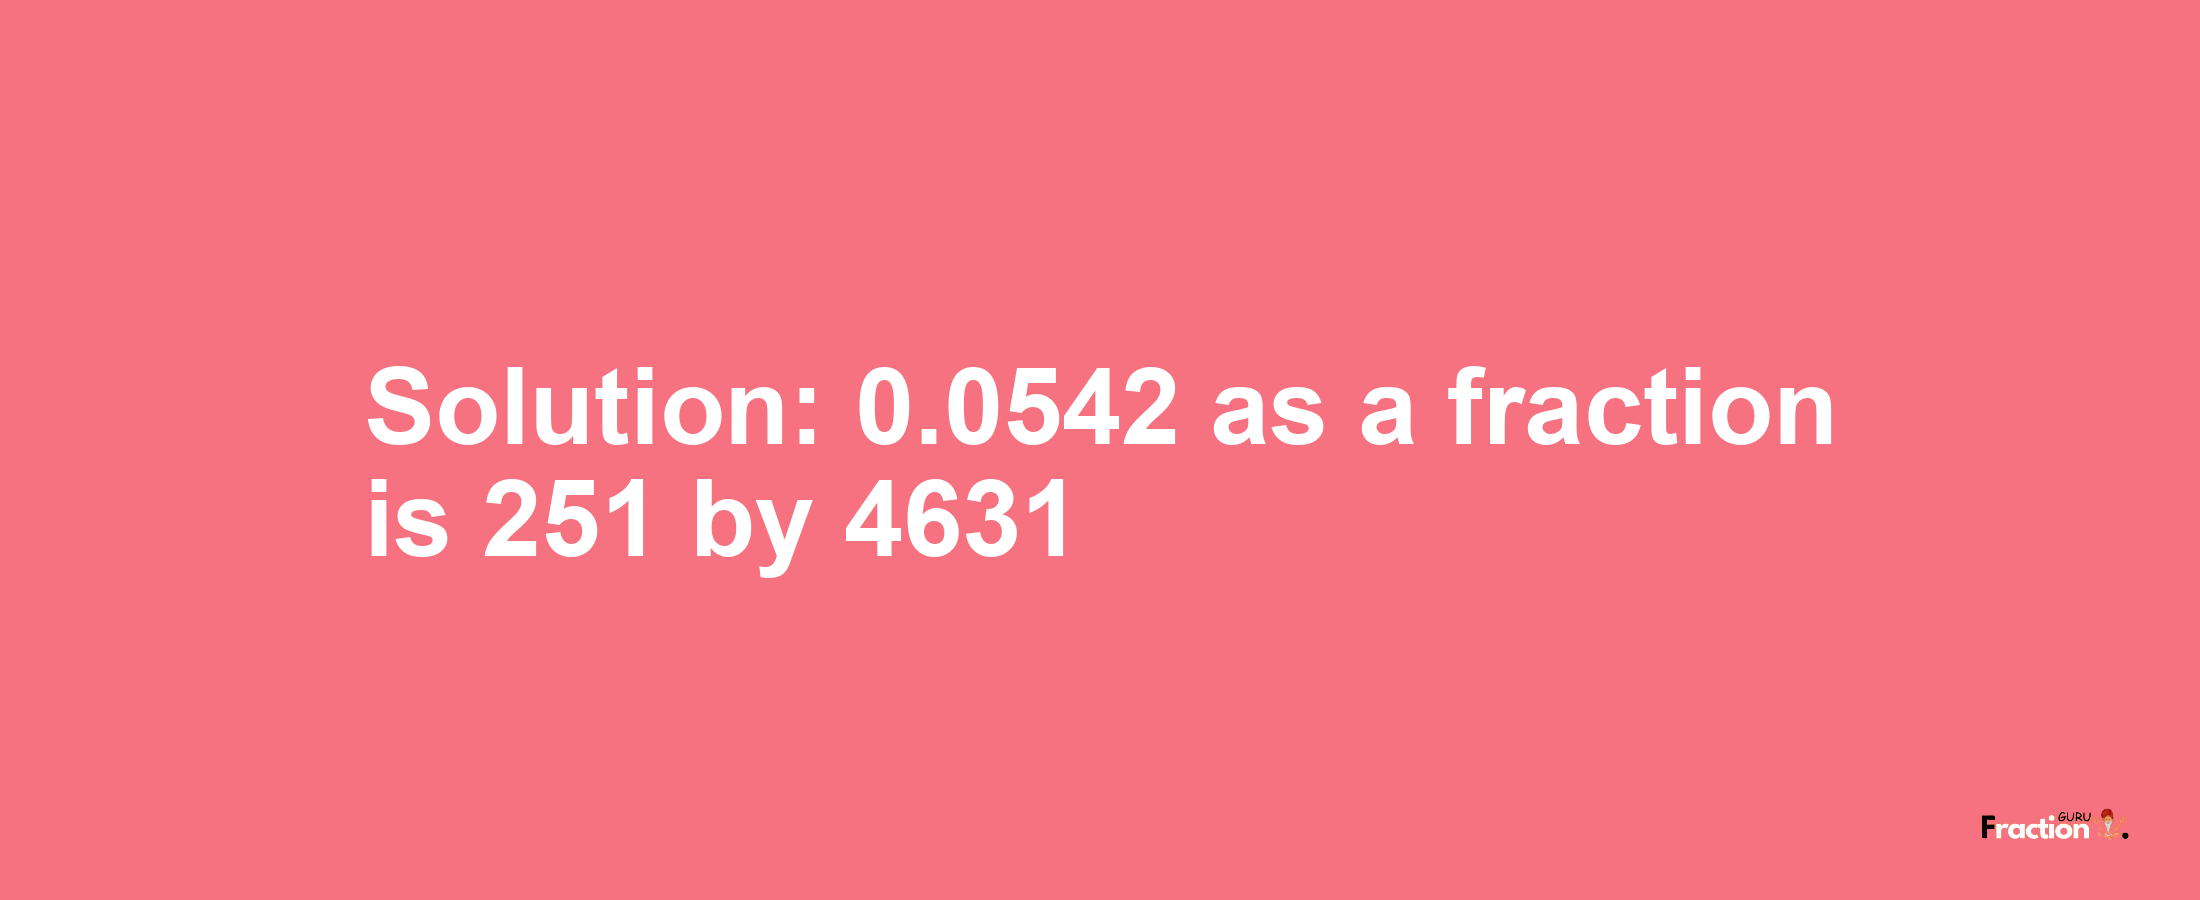 Solution:0.0542 as a fraction is 251/4631